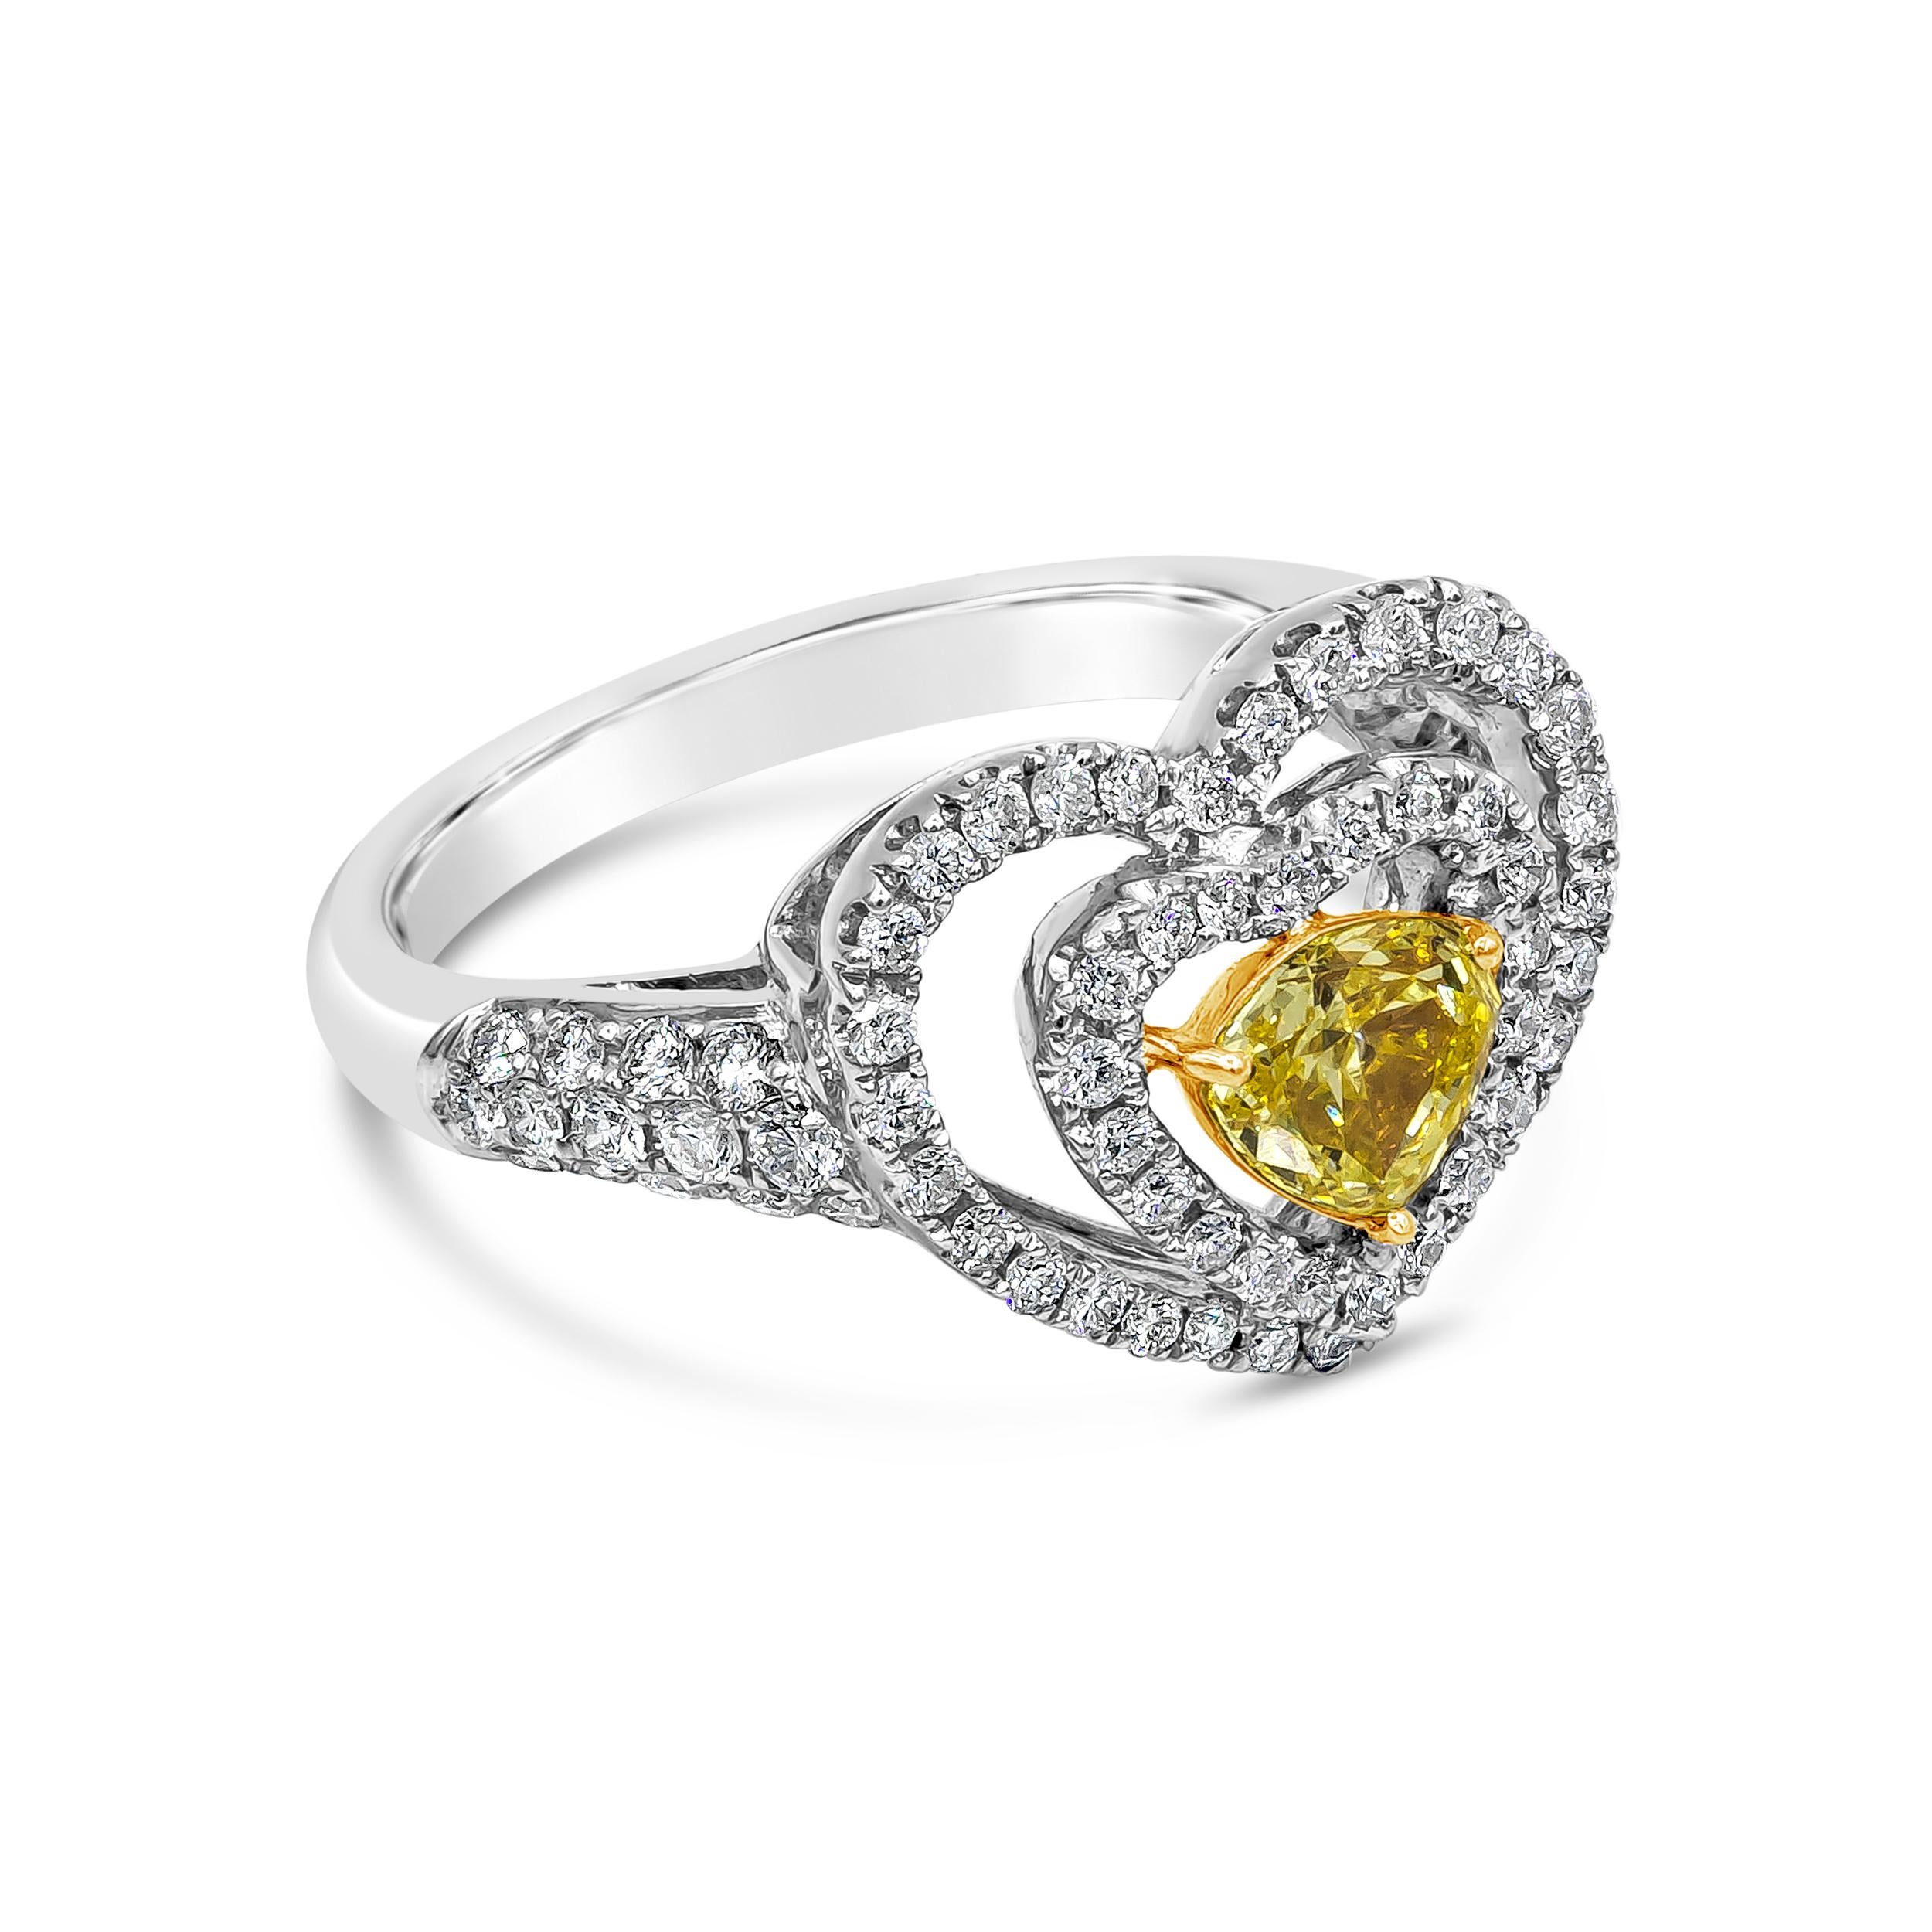 A unique and chic engagement ring showcasing a 0.58 carats yellow diamond, set in an open-work double halo design shaped like a heart. Accent diamonds weigh 0.72 carats total. Made in 18K White Gold. Size 6.5 US resizable upon request.

Roman